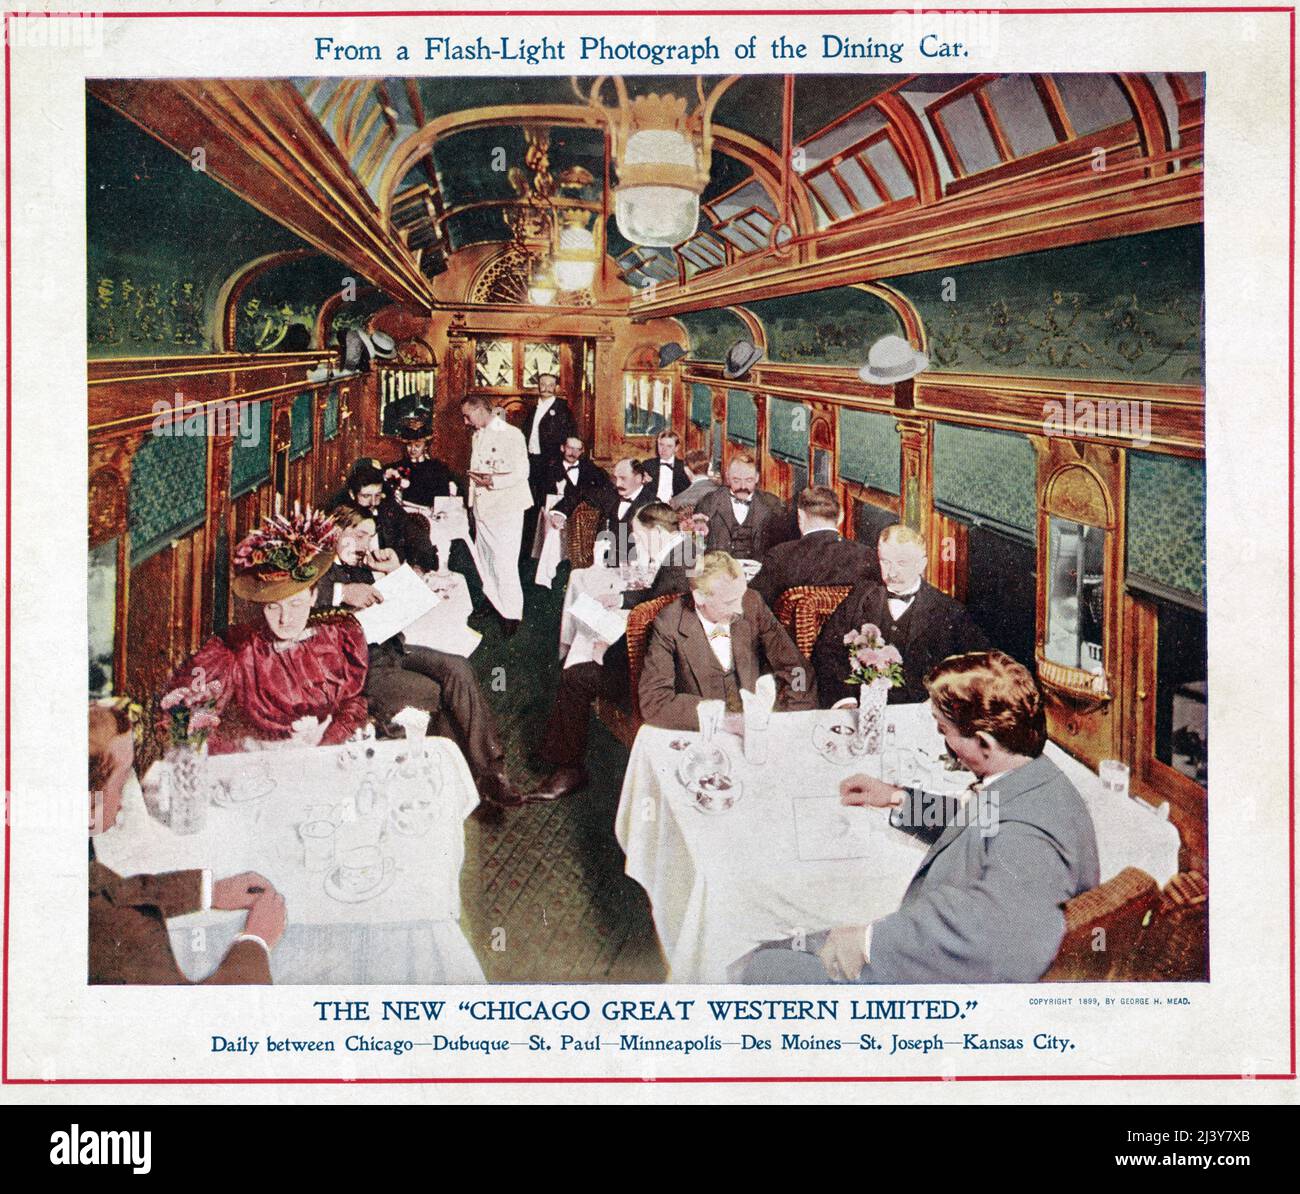 The new 'Chicago Great Western Limited' daily between Chicago--Dubuque--St. Paul--Minneapolis--Des Moines--St. Joseph--Kansas City.   Photograph shows interior view of railroad dining car filled with passengers dining, circa 1899 Stock Photo